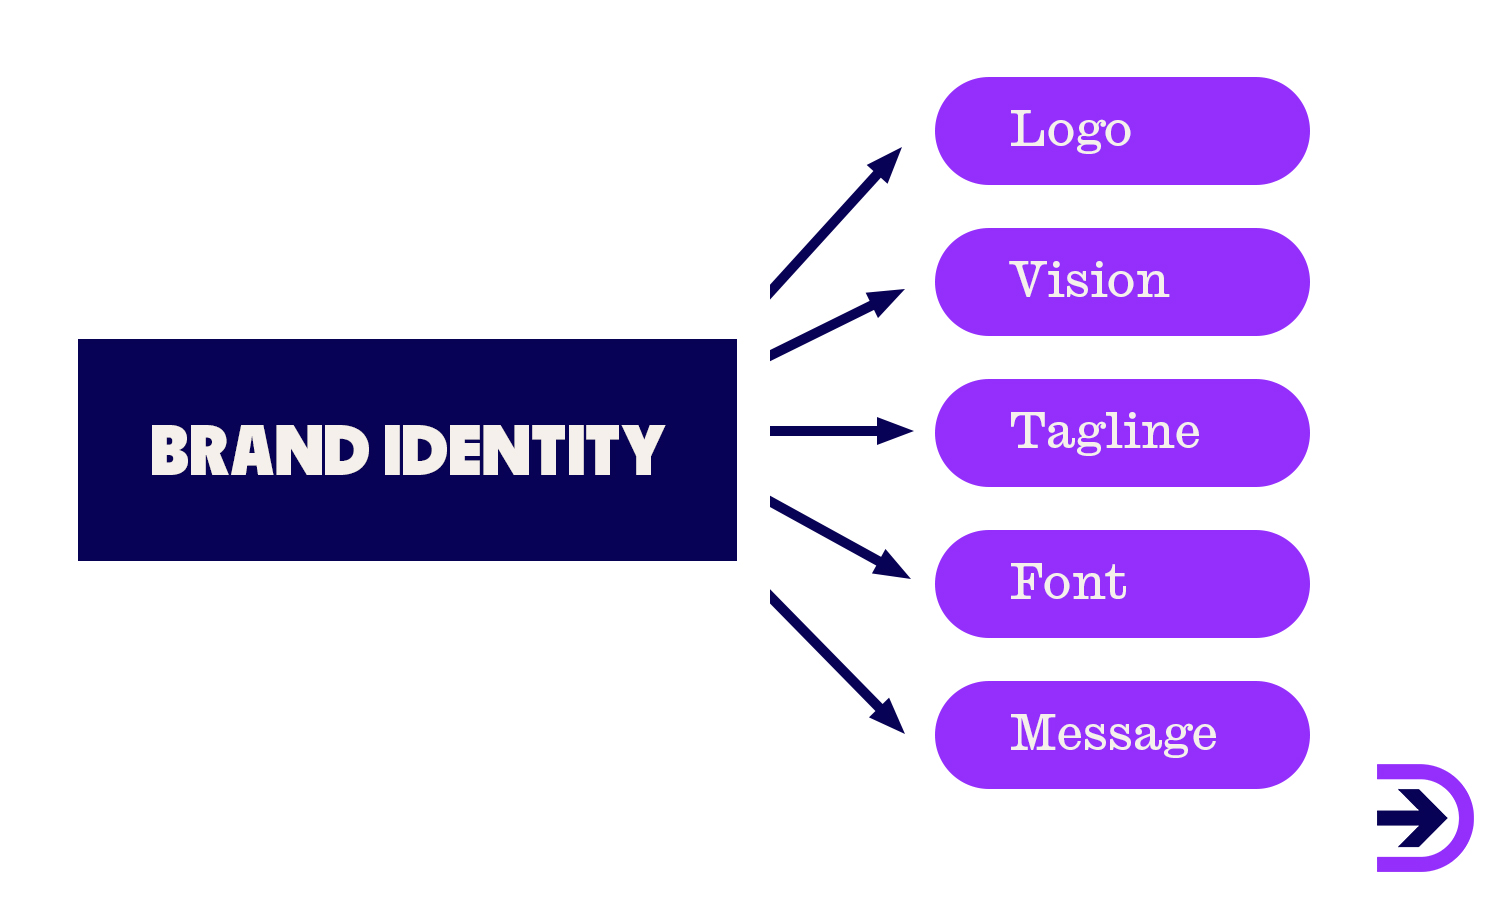 Consider how logo, vision, tagline, font and message contribute to your brand identity.